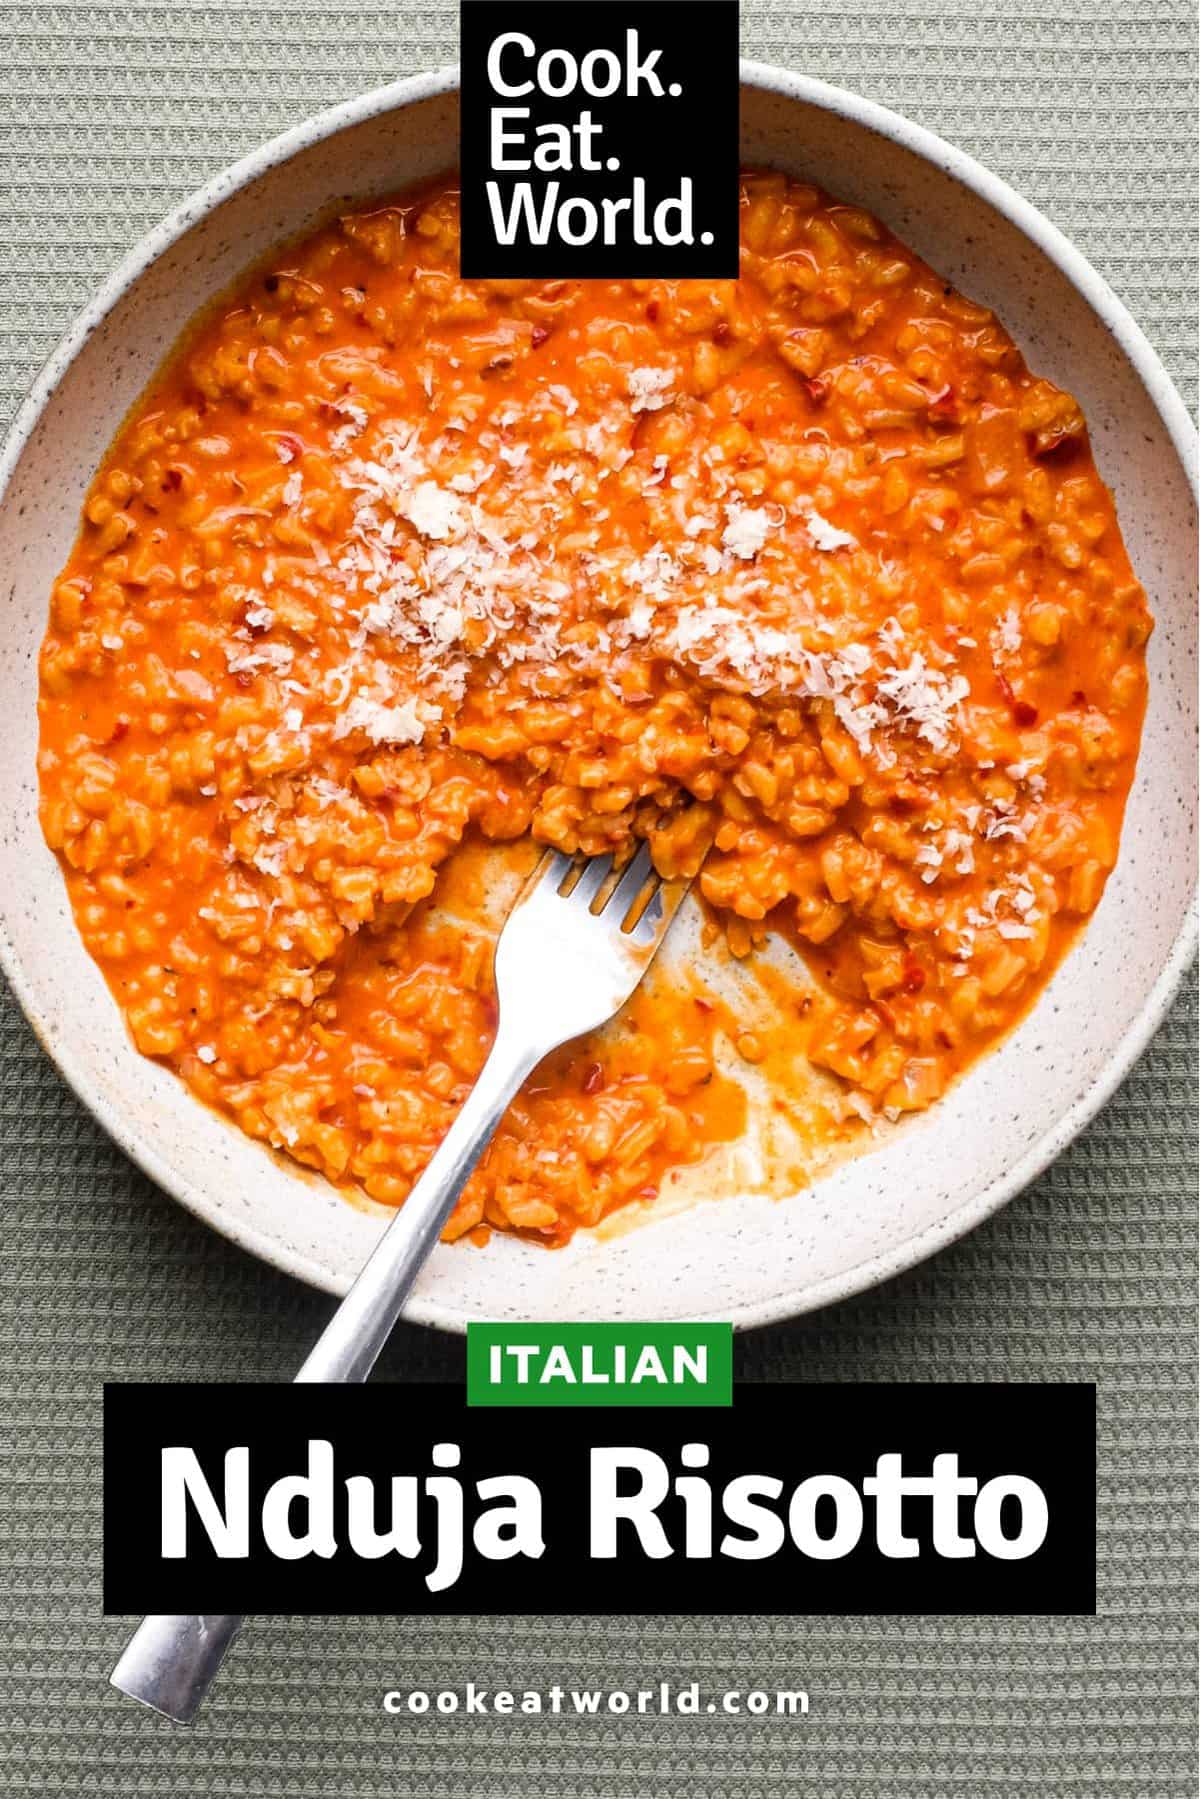 A bowl of Italian nduja risotto scattered with cheese. A fork sits alongside the bowl